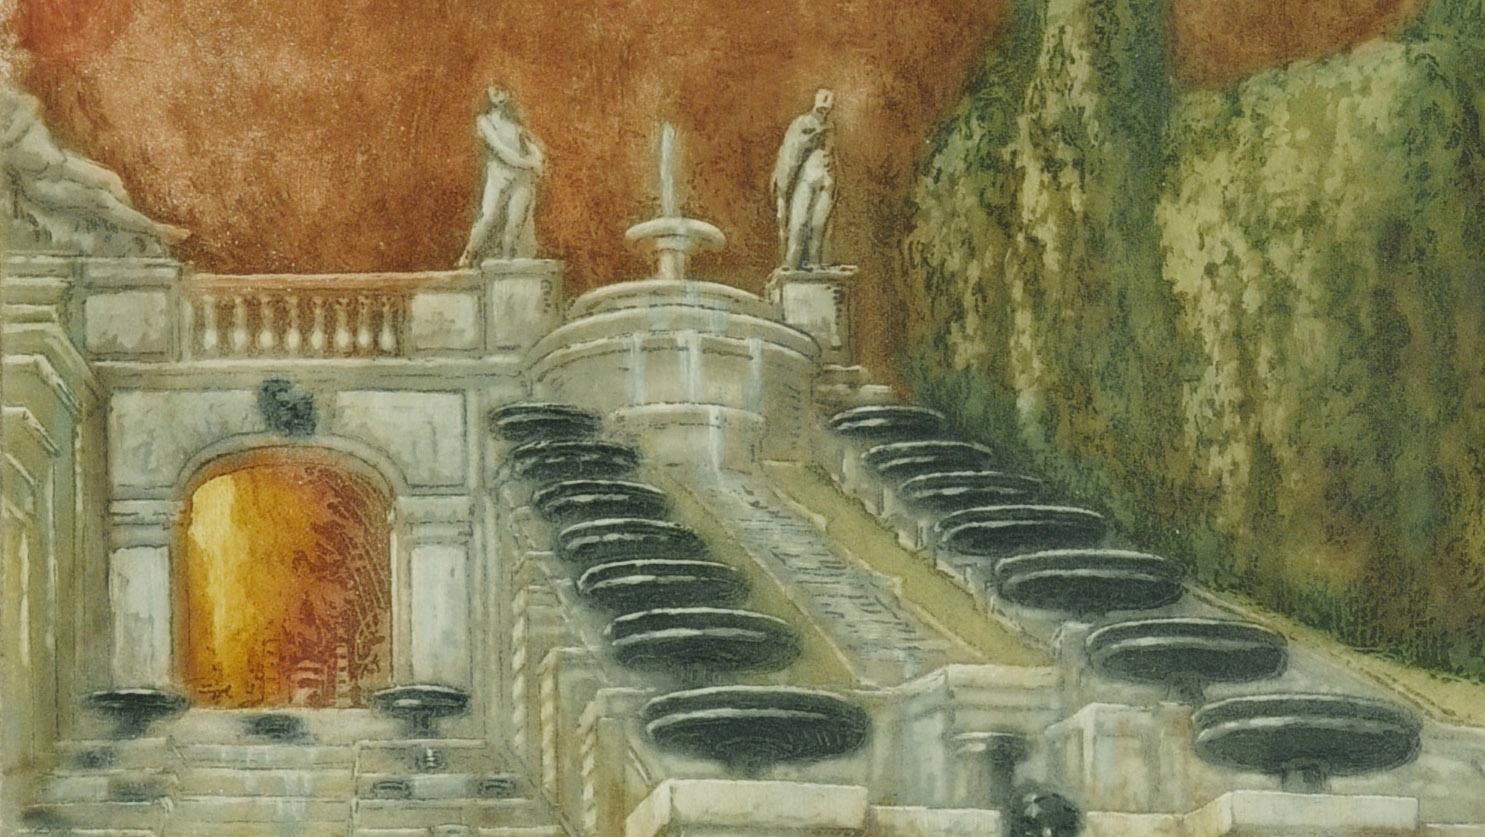 La Grande Cascade de Saint Cloud
Color aquatint on watermarked Arches J Perrigot paper, 1905
Signed by the artist in pencil lower right.  (see photo)
Edition: 100. Numbered 